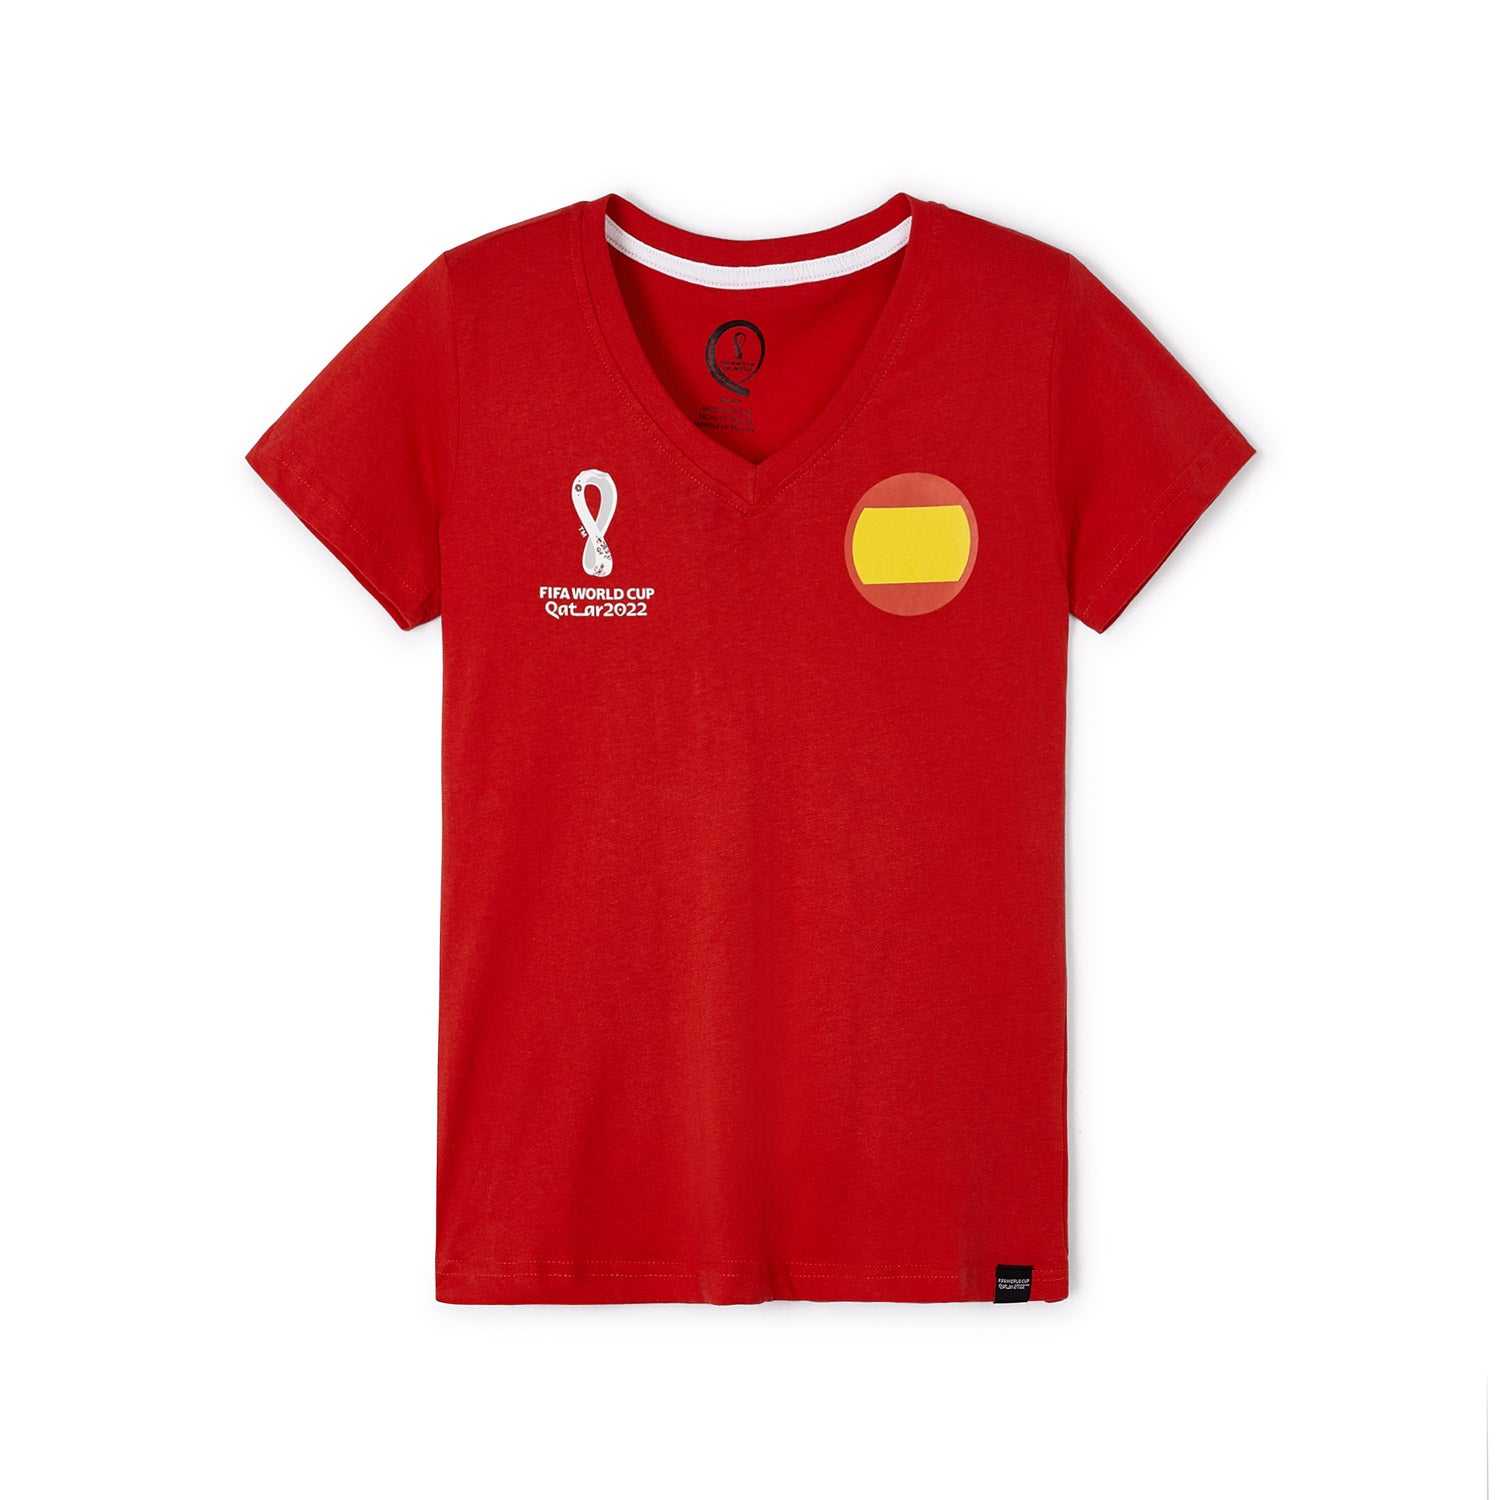 2022 World Cup Spain Red T-Shirt - Women's